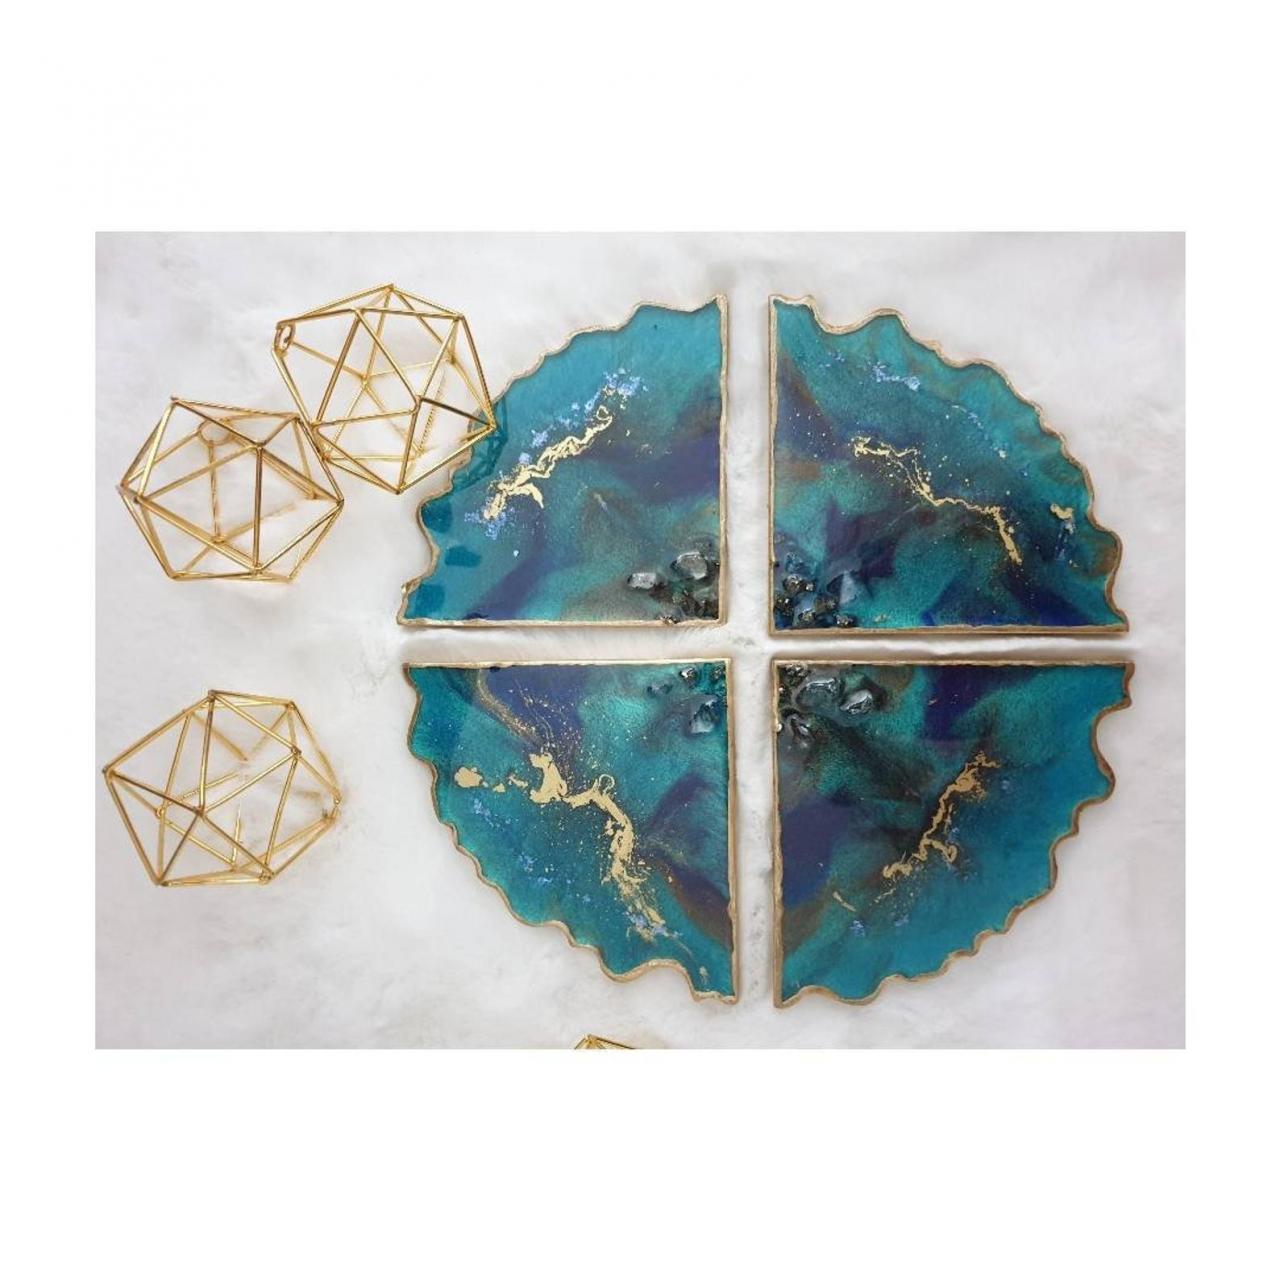 Turquoise & Blue With Crystals Resin Coasters Set